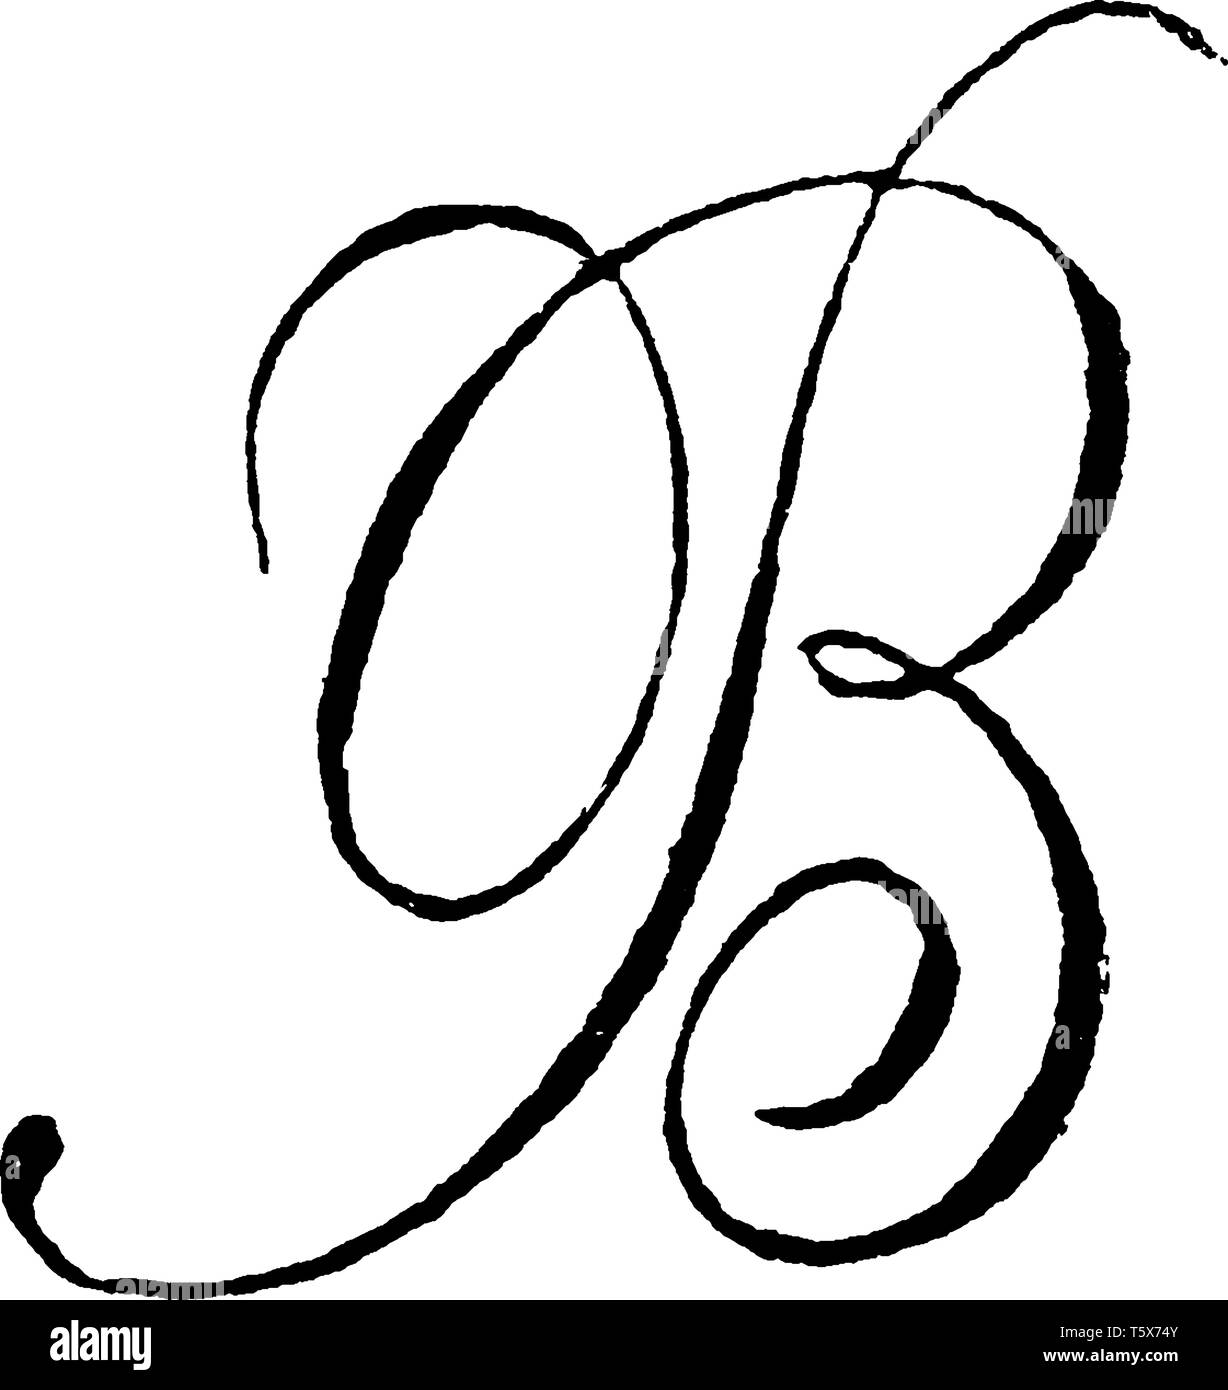 A decorative capital letter B, vintage line drawing or engraving illustration Stock Vector